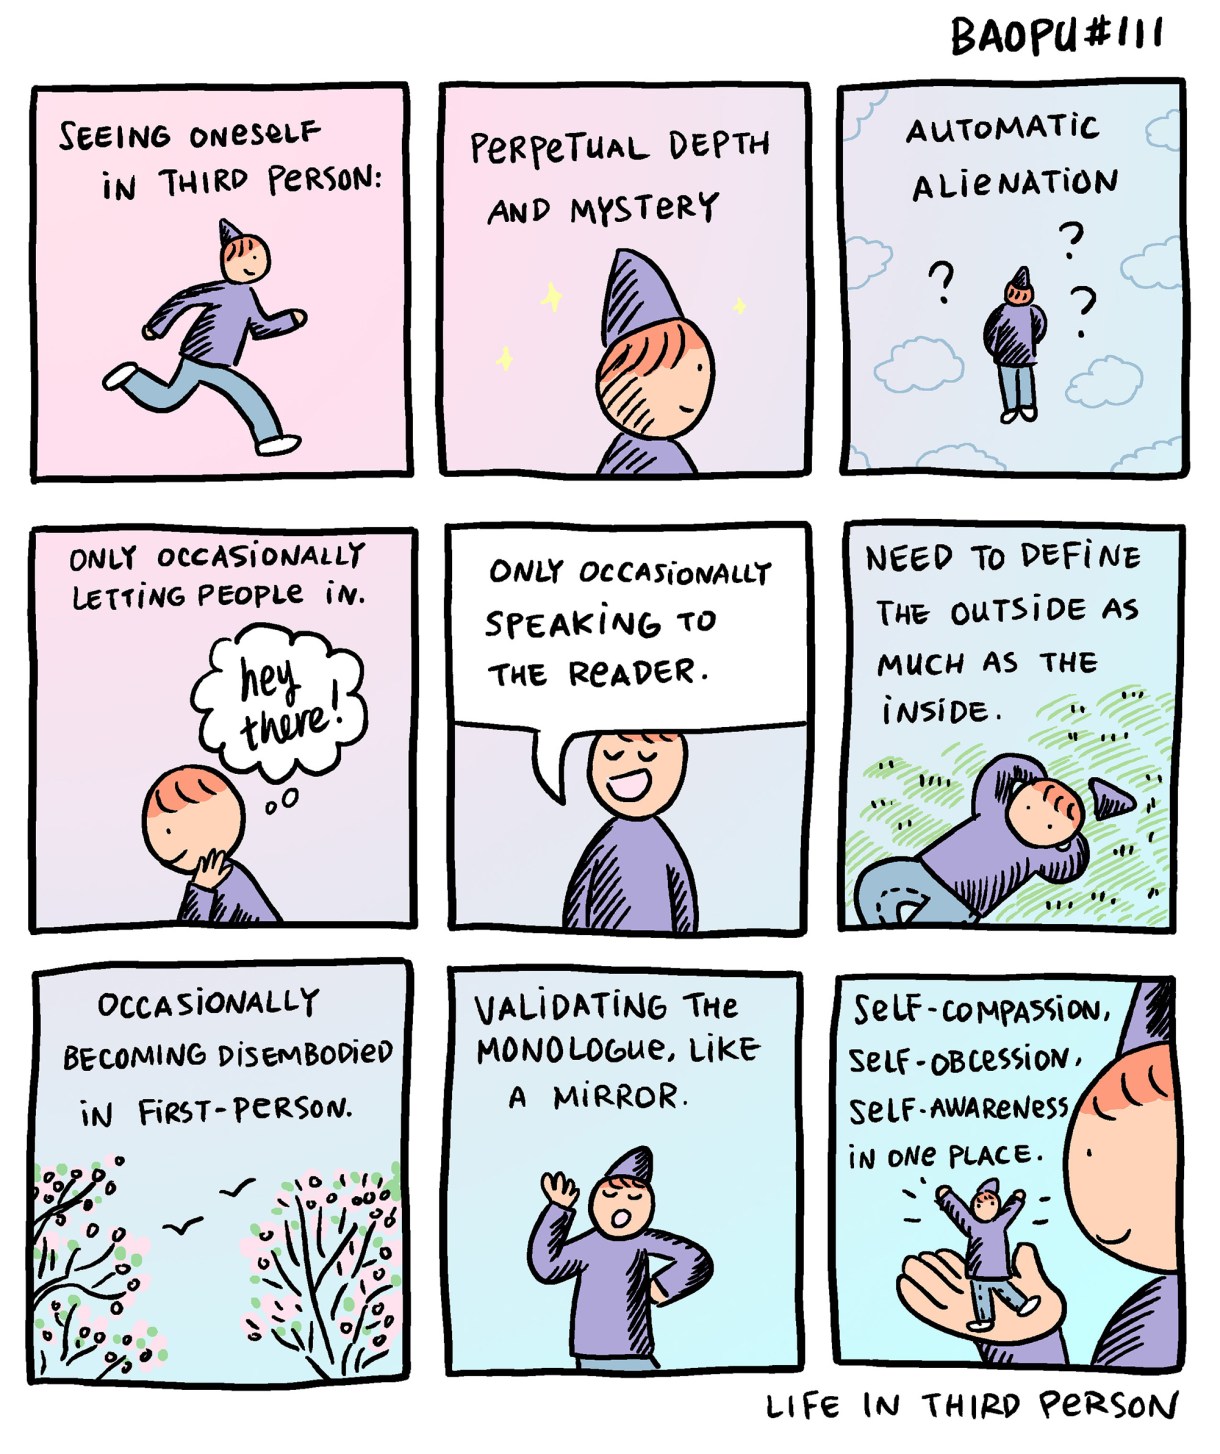 A nine panel comic in shades of pink and blue show Baopu, an Asian person with red hair, wondering about "seeing oneself in third person...perpetual depth and mystery... automatic alienation??" Before slowly deciding to let people in and speak directly tot he reader about the importance of going outside, giving self-affirmations, and also self-awareness and compassion.